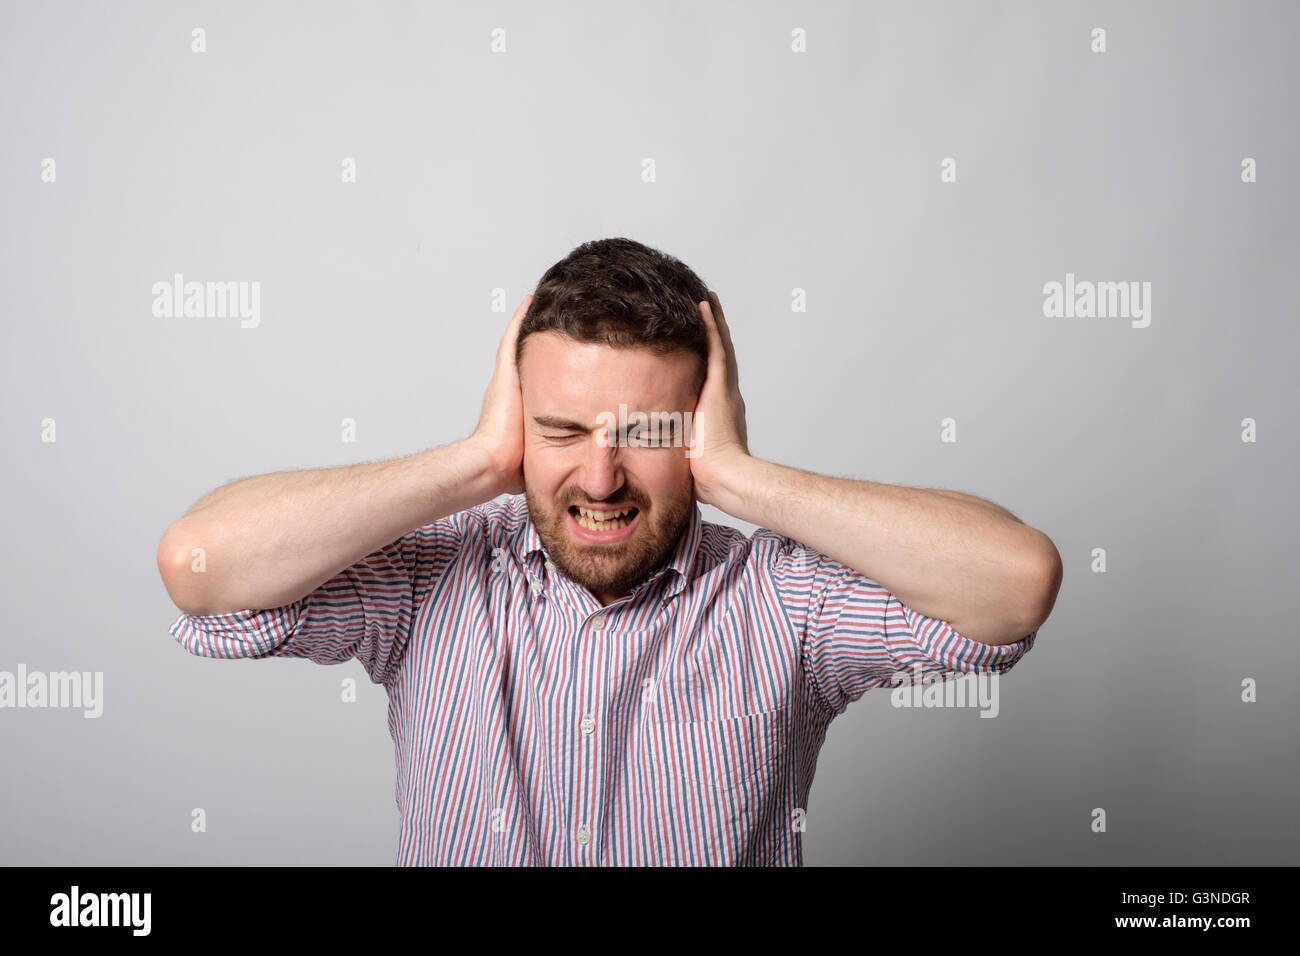 Man does not want to hear anything Stock Photo